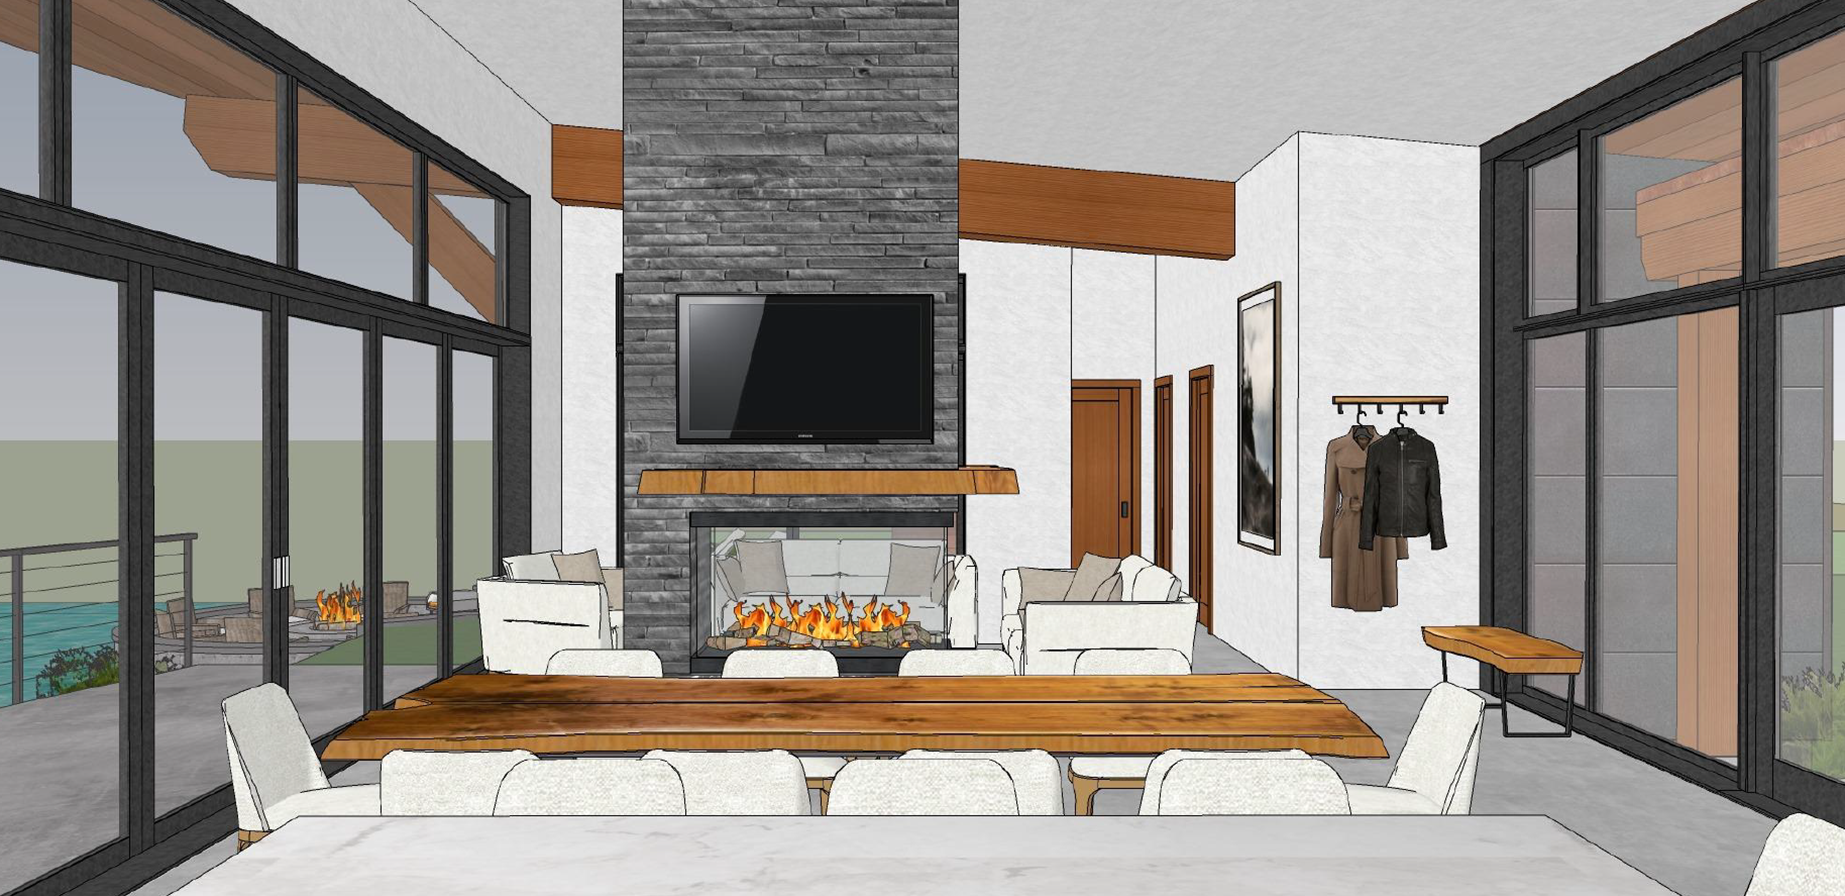 design of dining and living area with fireplace for a Rocky Mountain house